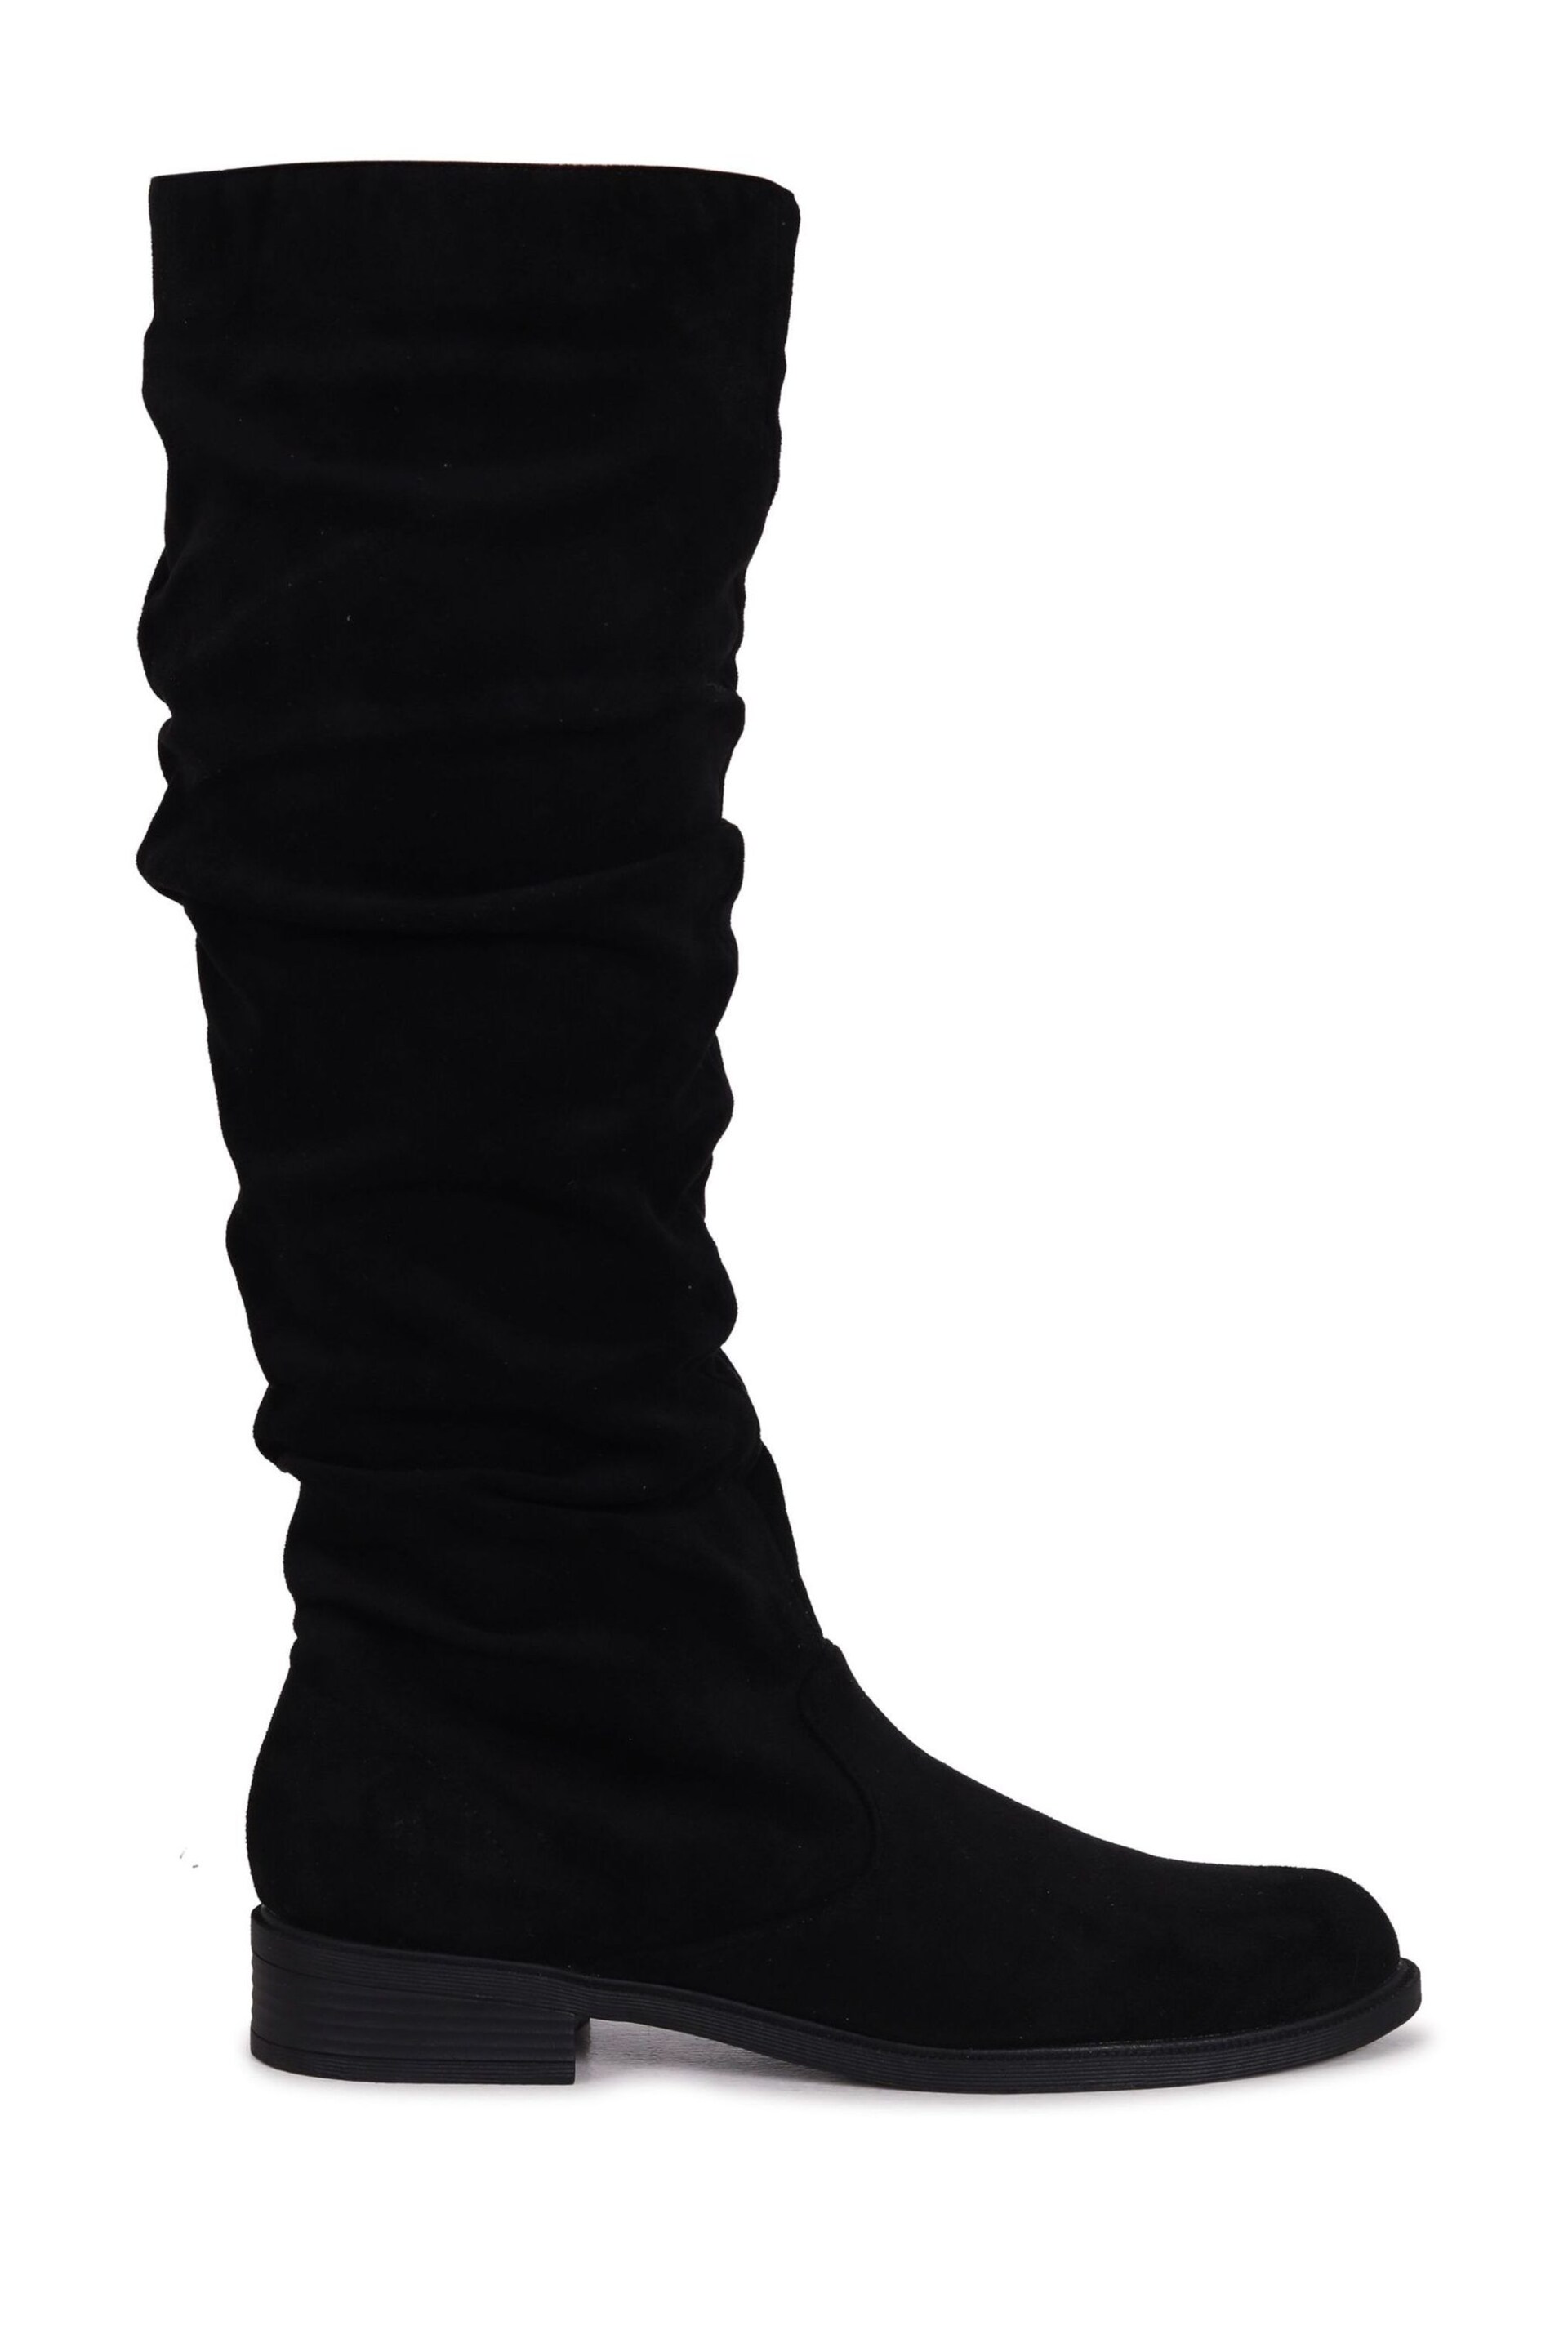 Linzi Black Ciara Faux Suede Flat Ruched Boots - Image 2 of 4